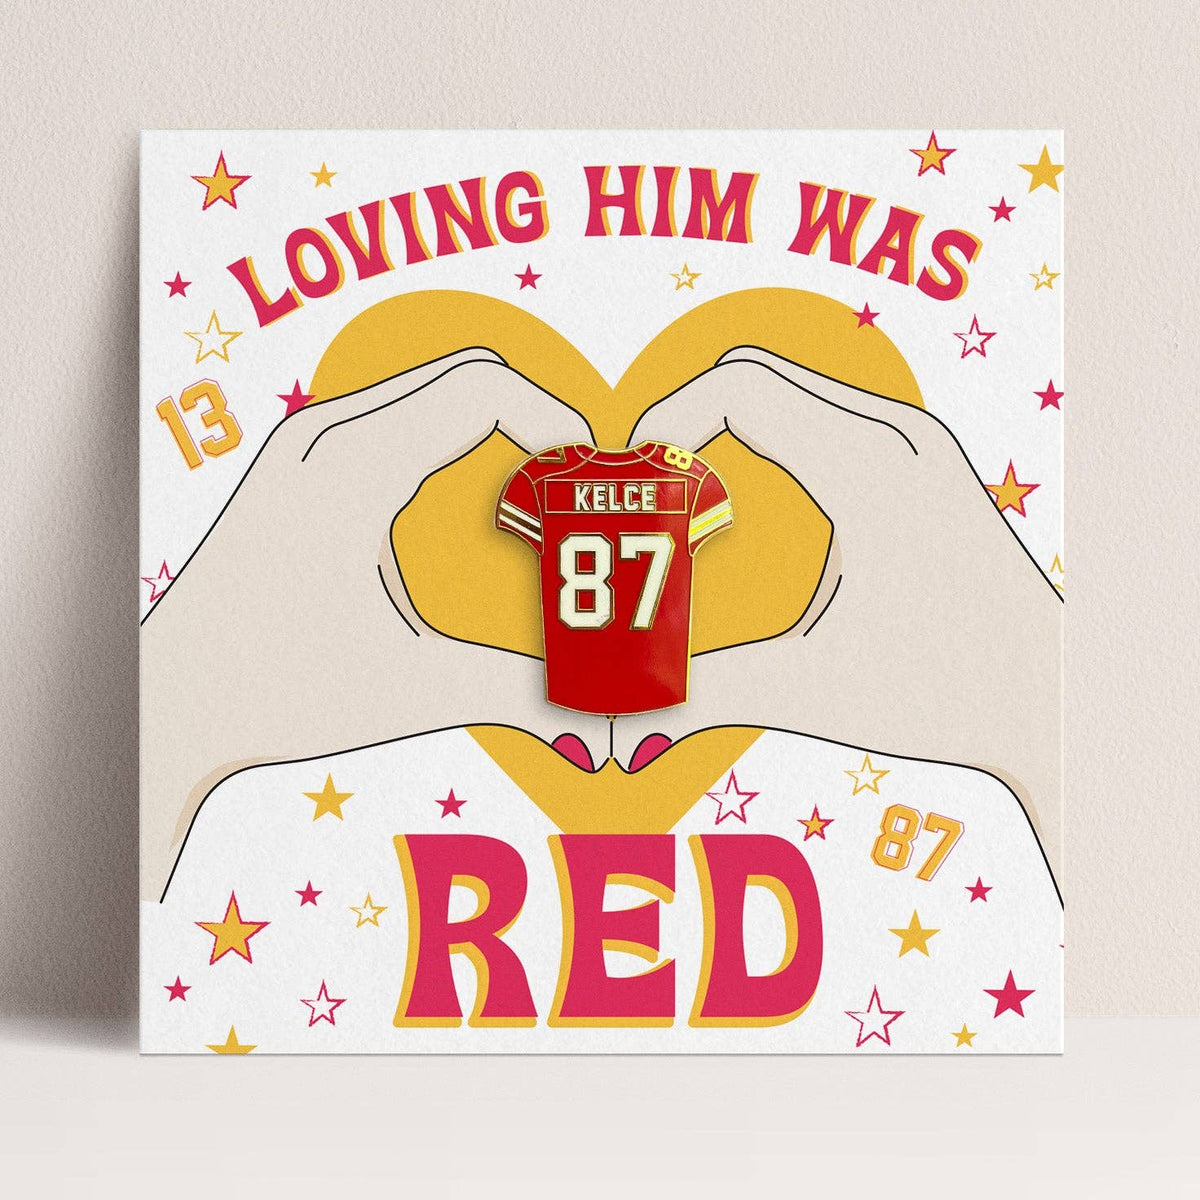 &quot;Loving Him Was RED&quot; Enamel Pin